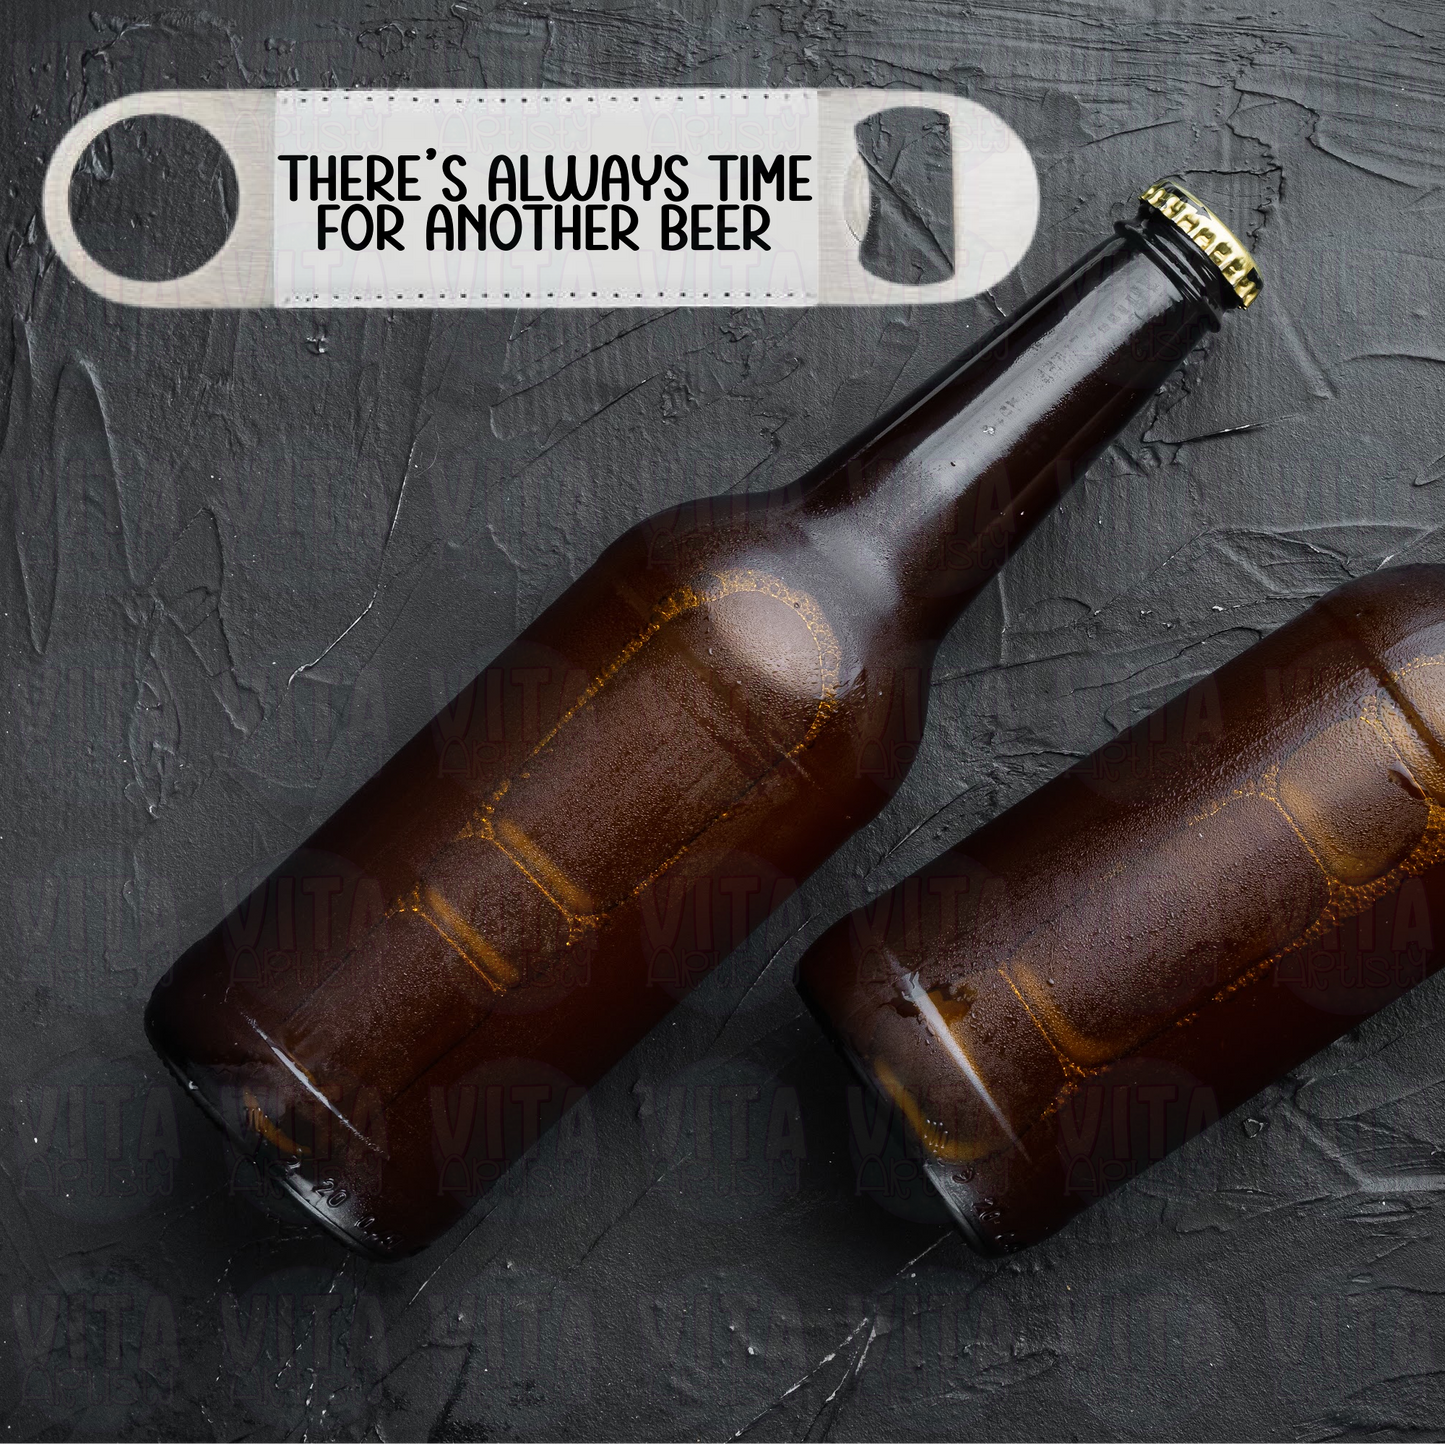 There's Always Time for Another Beer - 1 1/2" x 7" Stainless Steel Bottle Opener